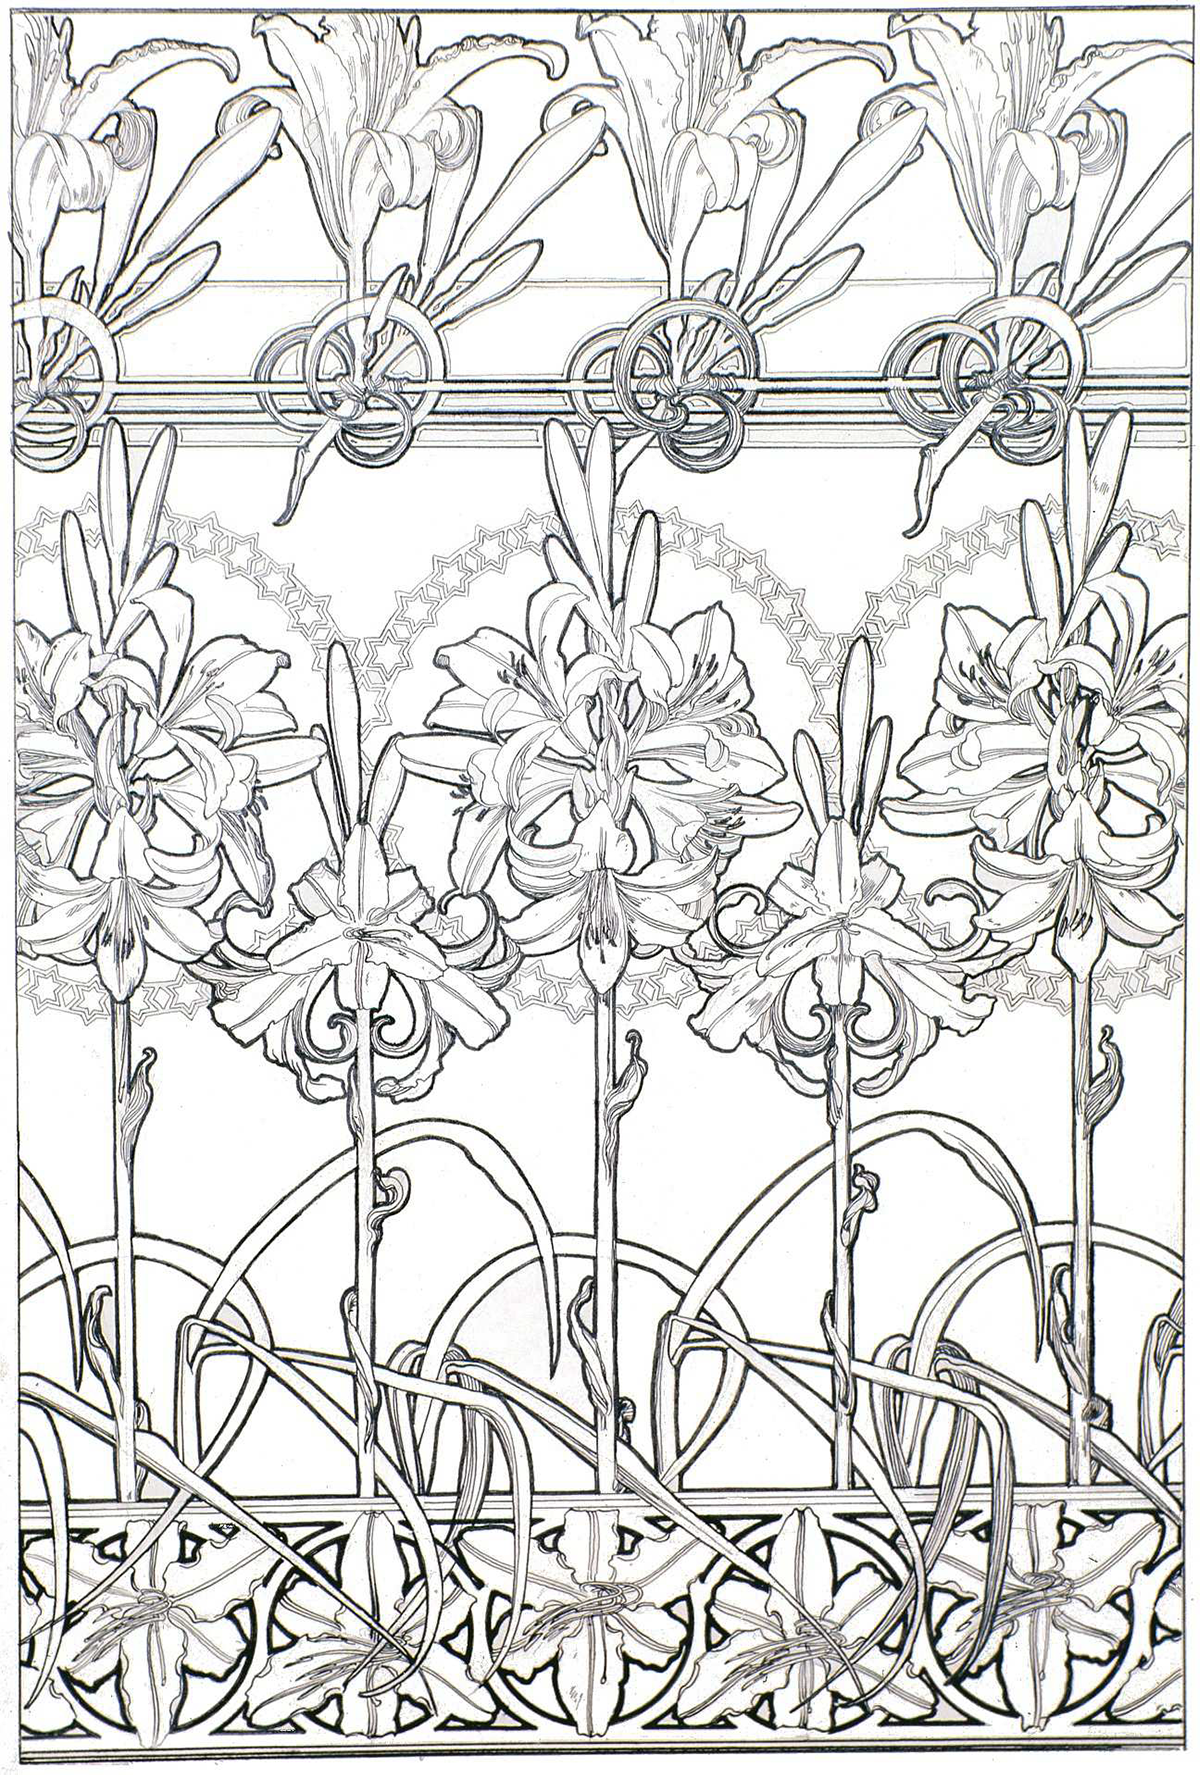 A coloring page of flowers